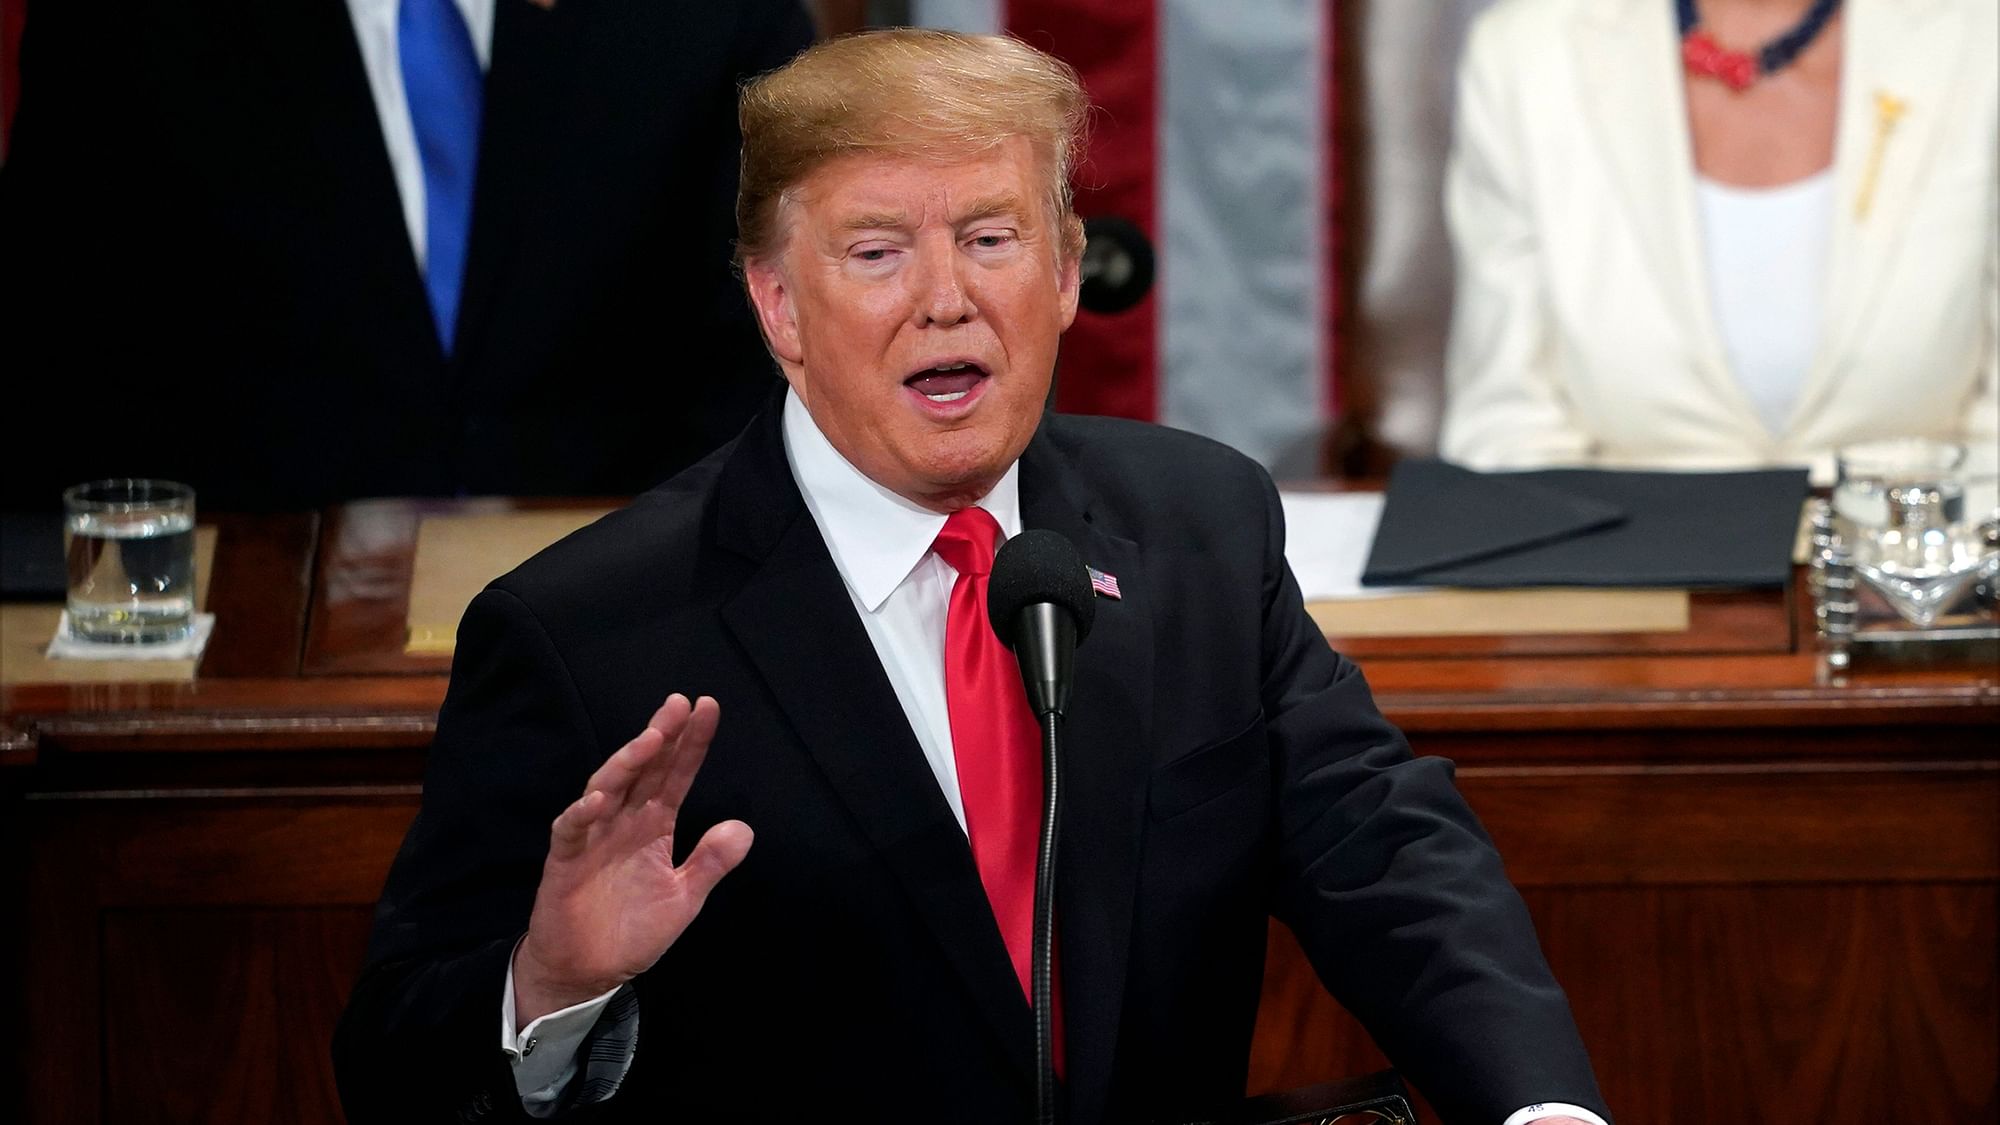 US President Donald Trump delivers his State of the Union address to a joint session of Congress on Capitol Hill in Washington.